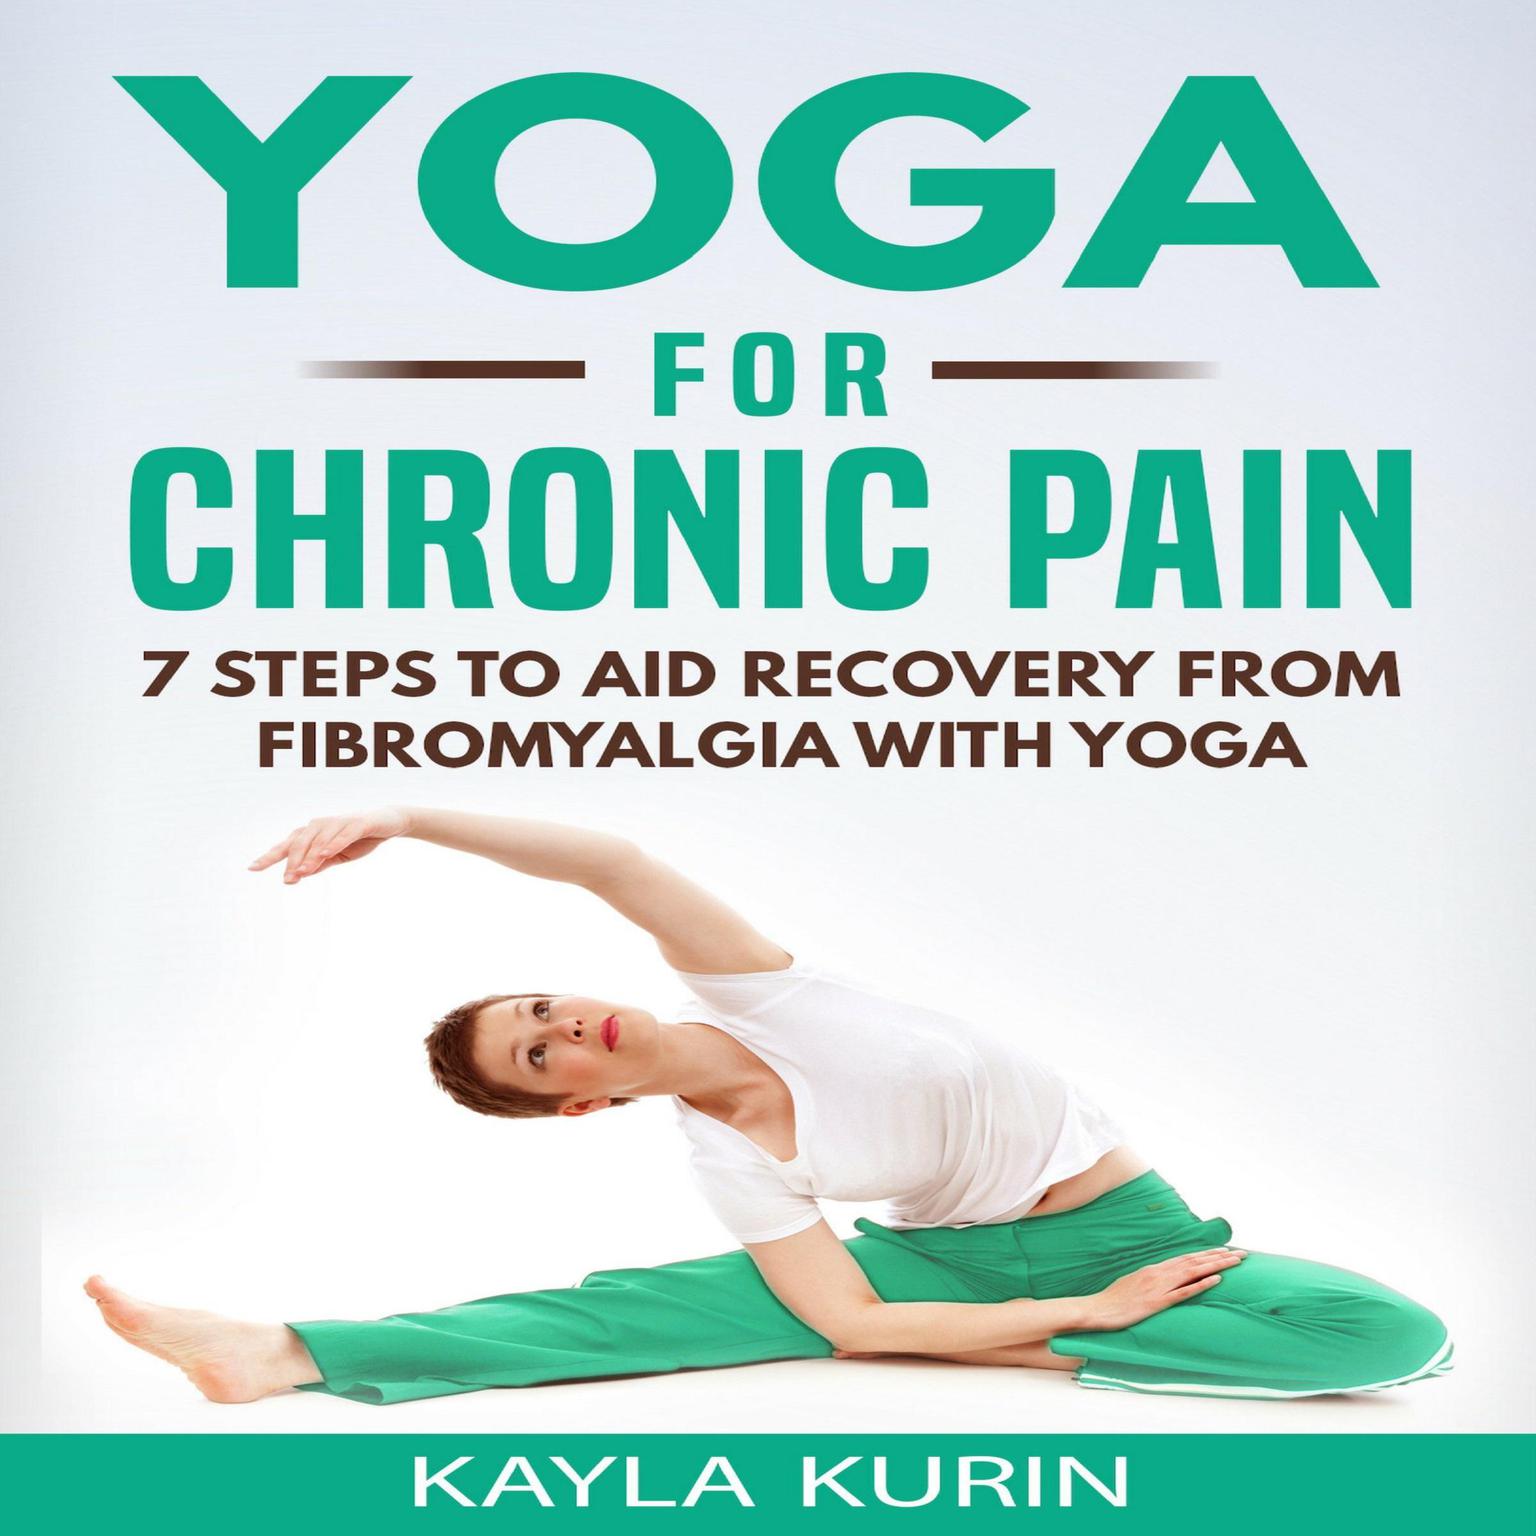 Yoga for Chronic Pain: 7 Steps to Aid Recovery From Fibromyalgia With Yoga  Audiobook, by Kayla Kurin